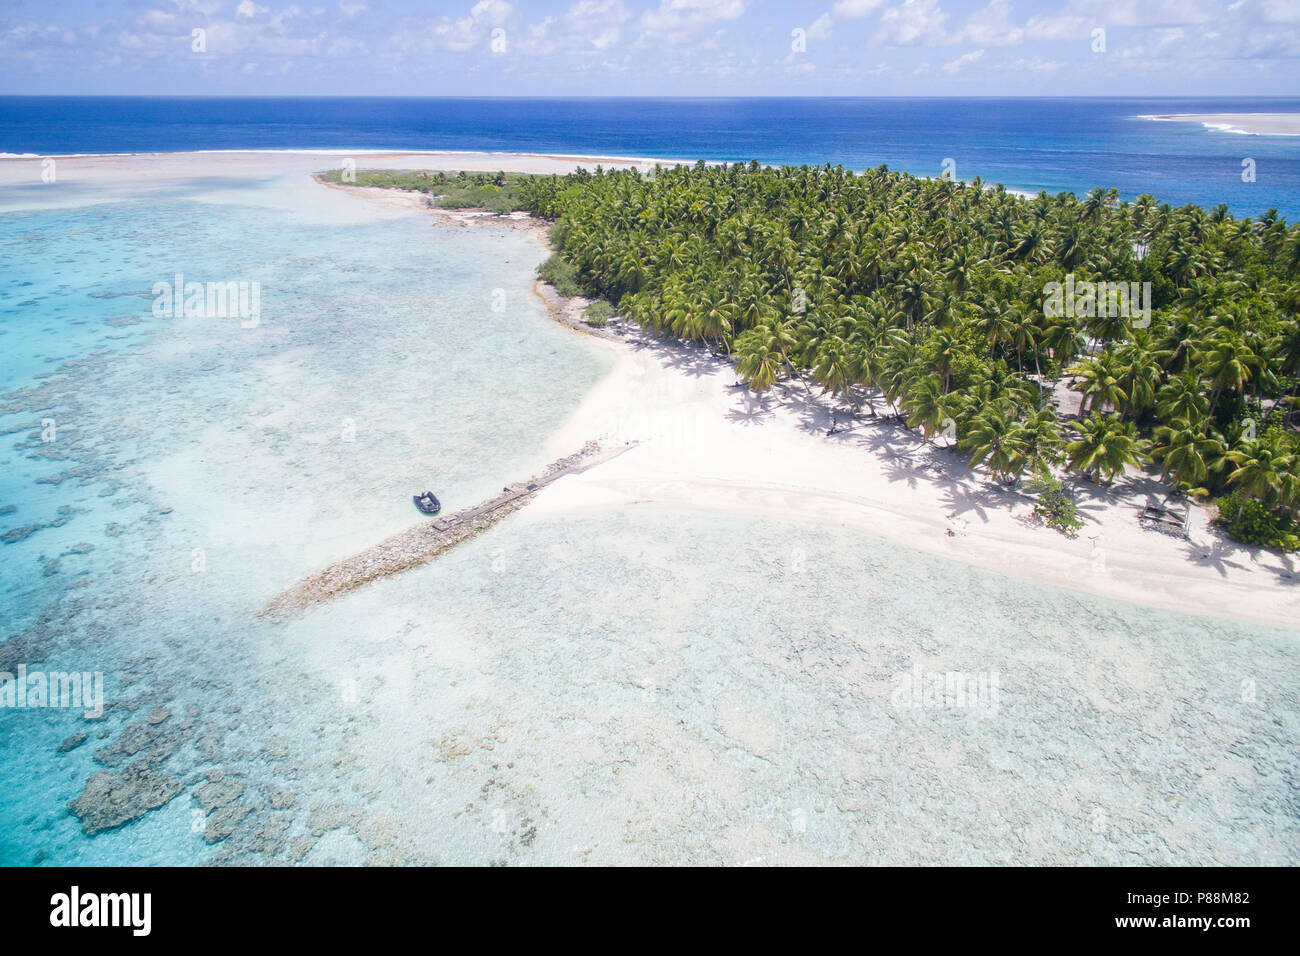 Aerial view of Anchorage Island in Suwarrow Atoll, Cook Islands Stock Photo